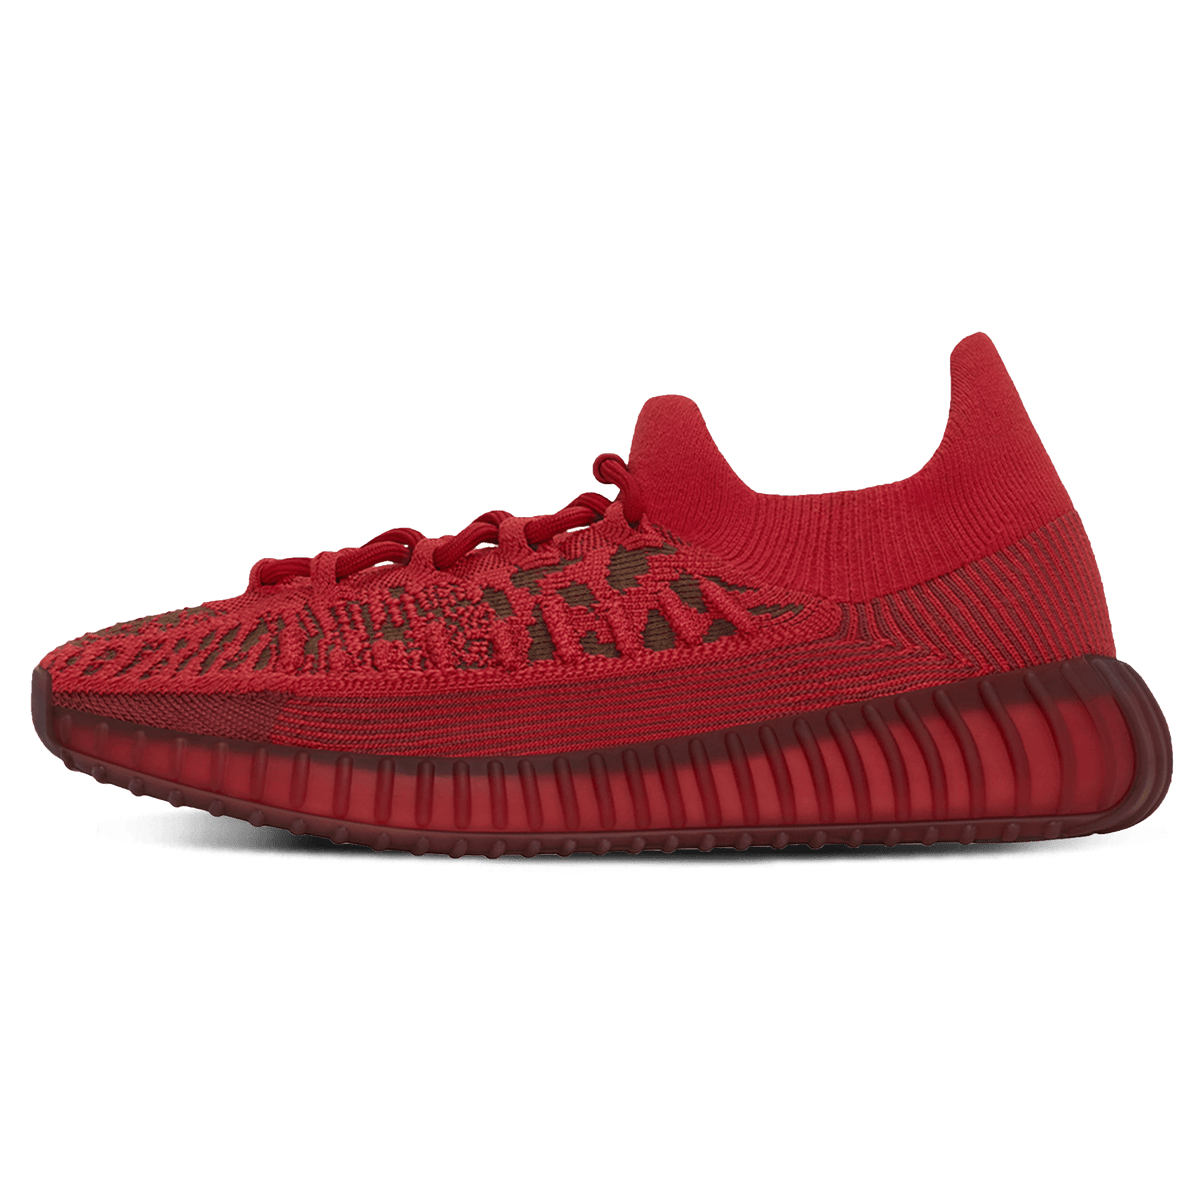 adidas Yeezy Boost 350 V2 CMPCT 'Slate Red' - Kick Game